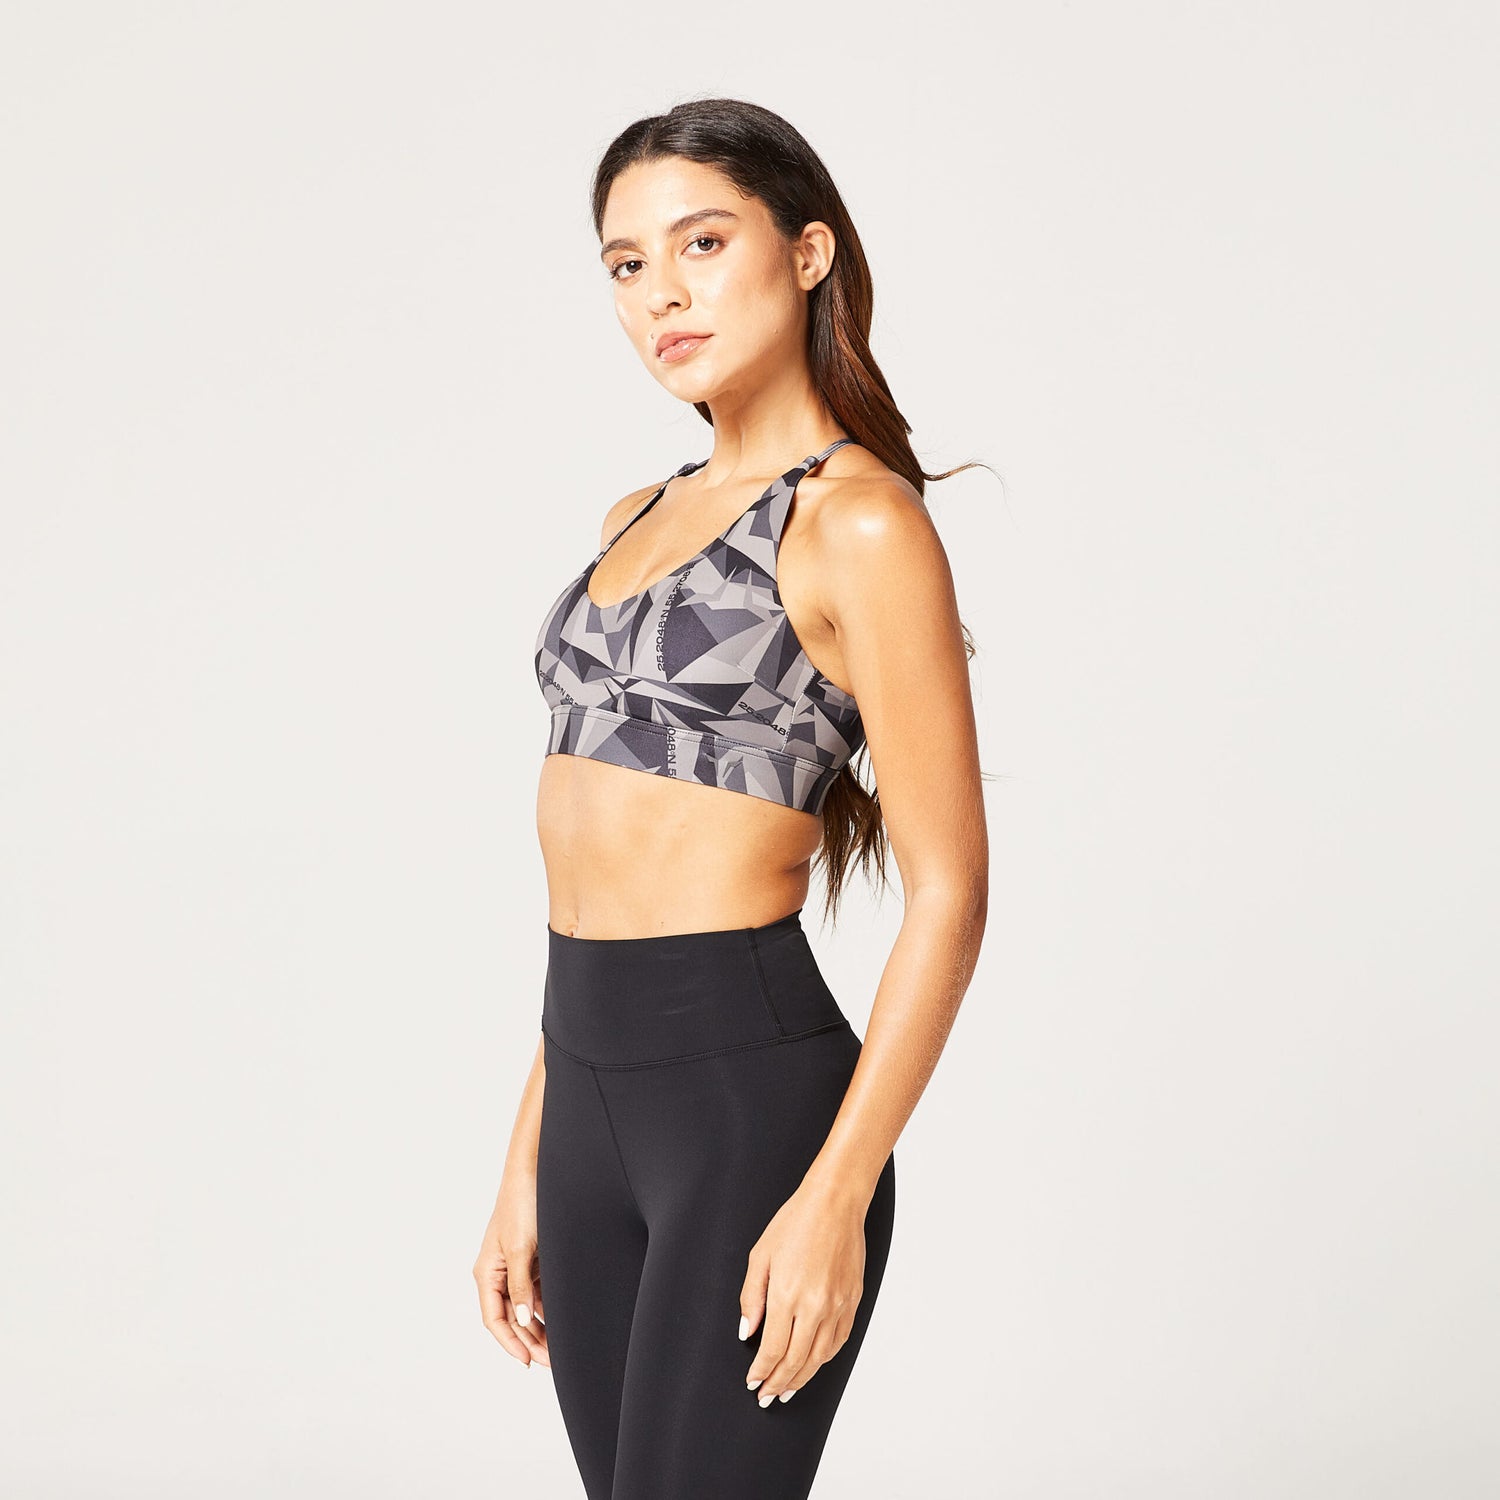 squatwolf-workout-clothes-code-live-in-bra-black-print-sports-bra-for-gym